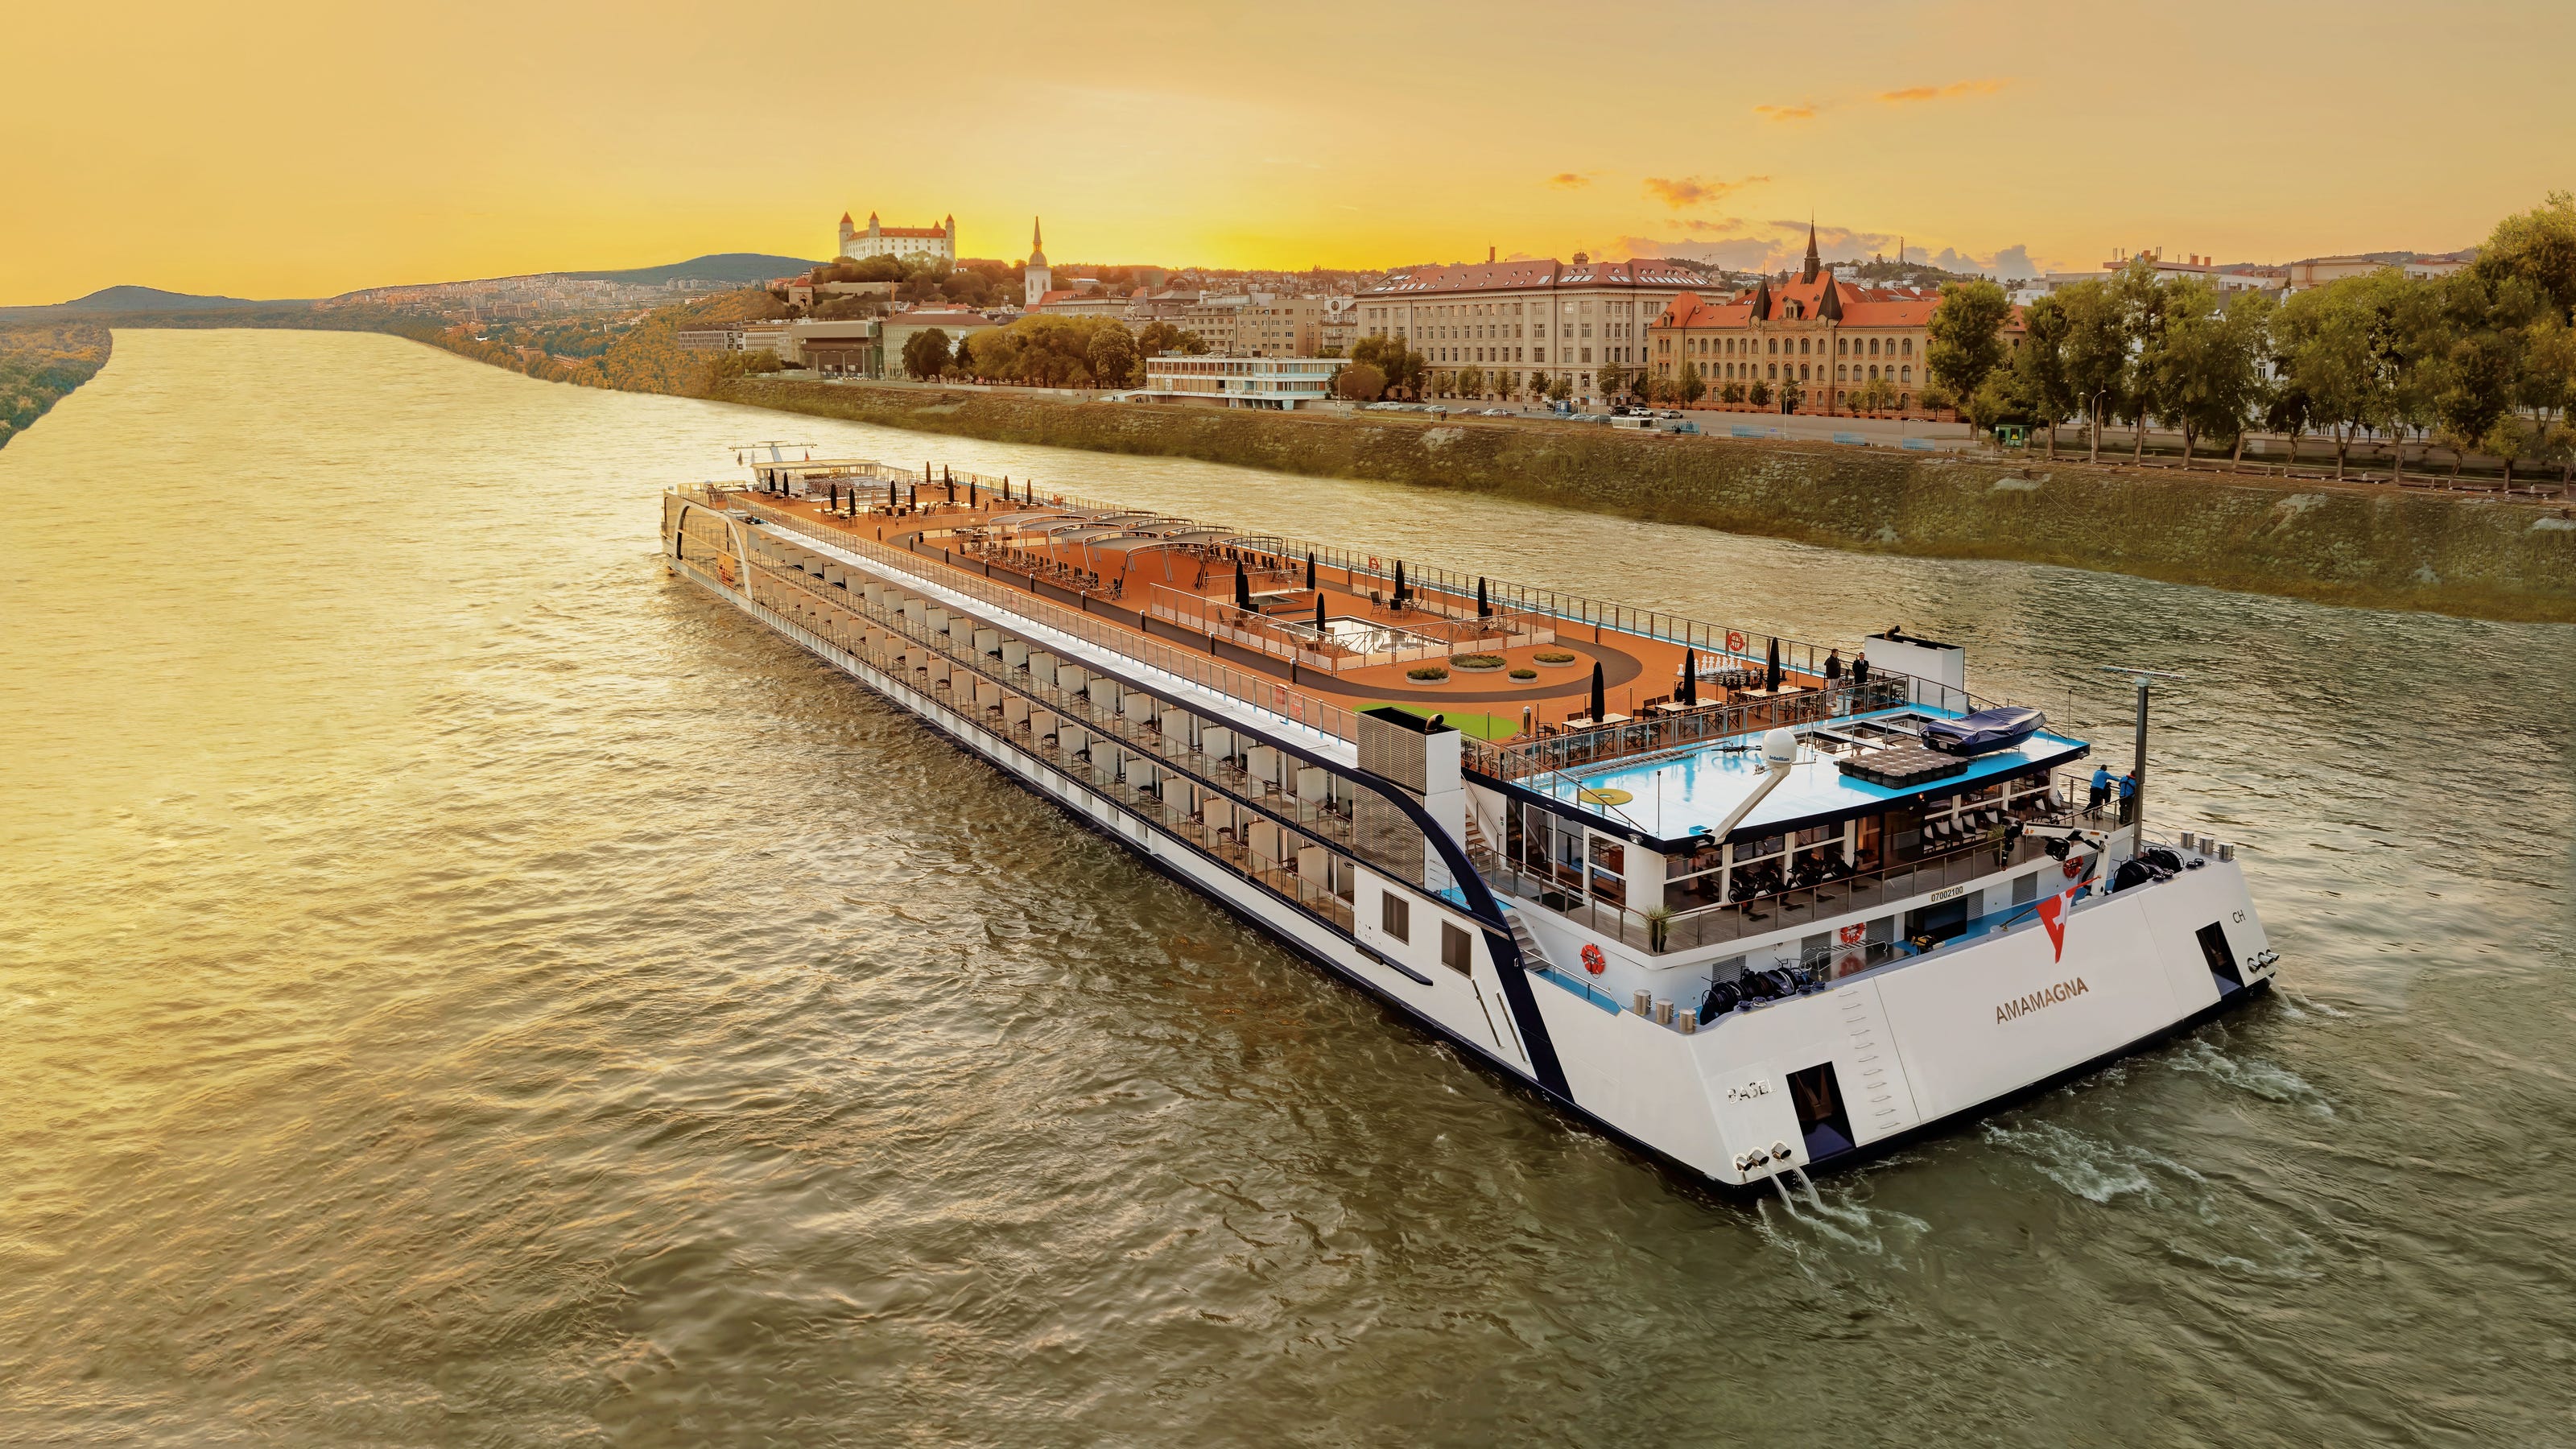 River cruises Find the right one for your budget and personality type